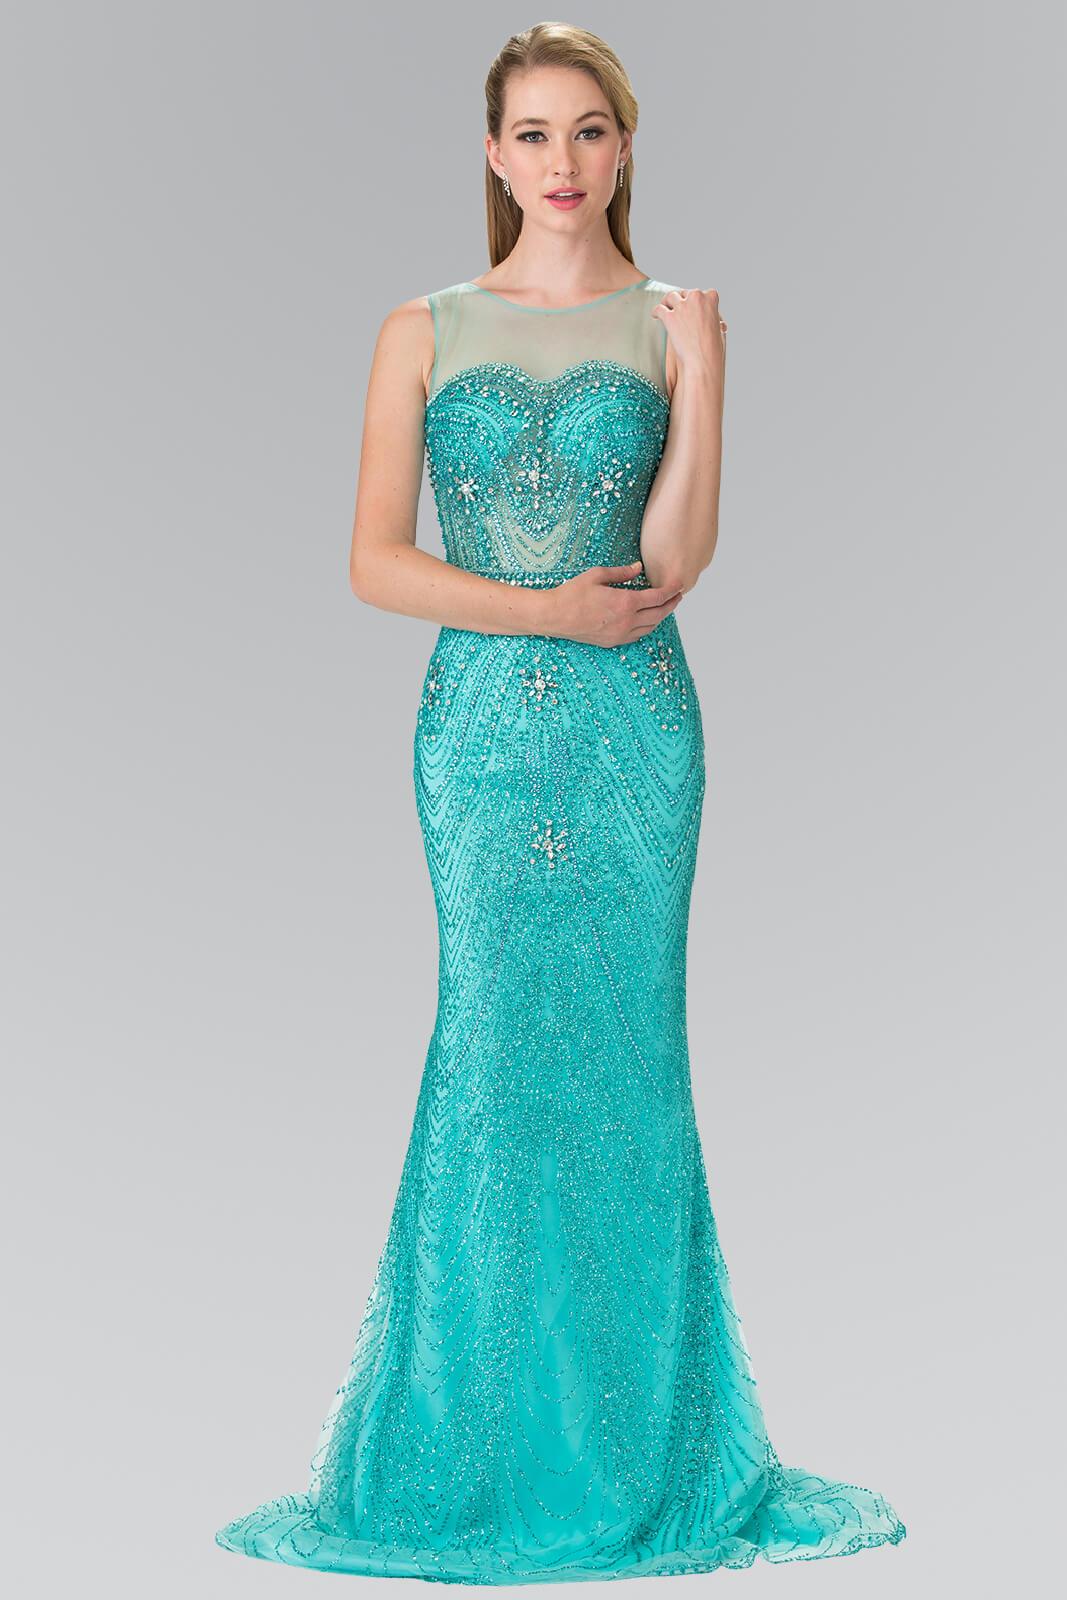 Prom Long Formal Beaded Sleeveless Evening Gown - The Dress Outlet Elizabeth K